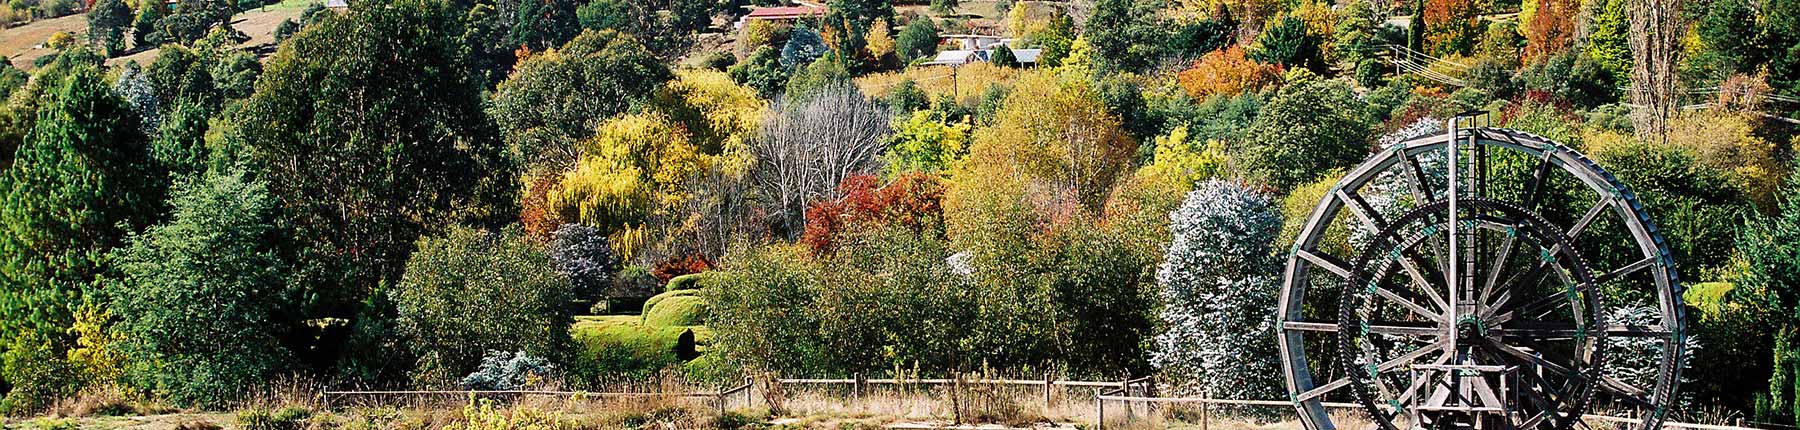 18Our-valley-the-most-beautiful-in-Victoria.jpg